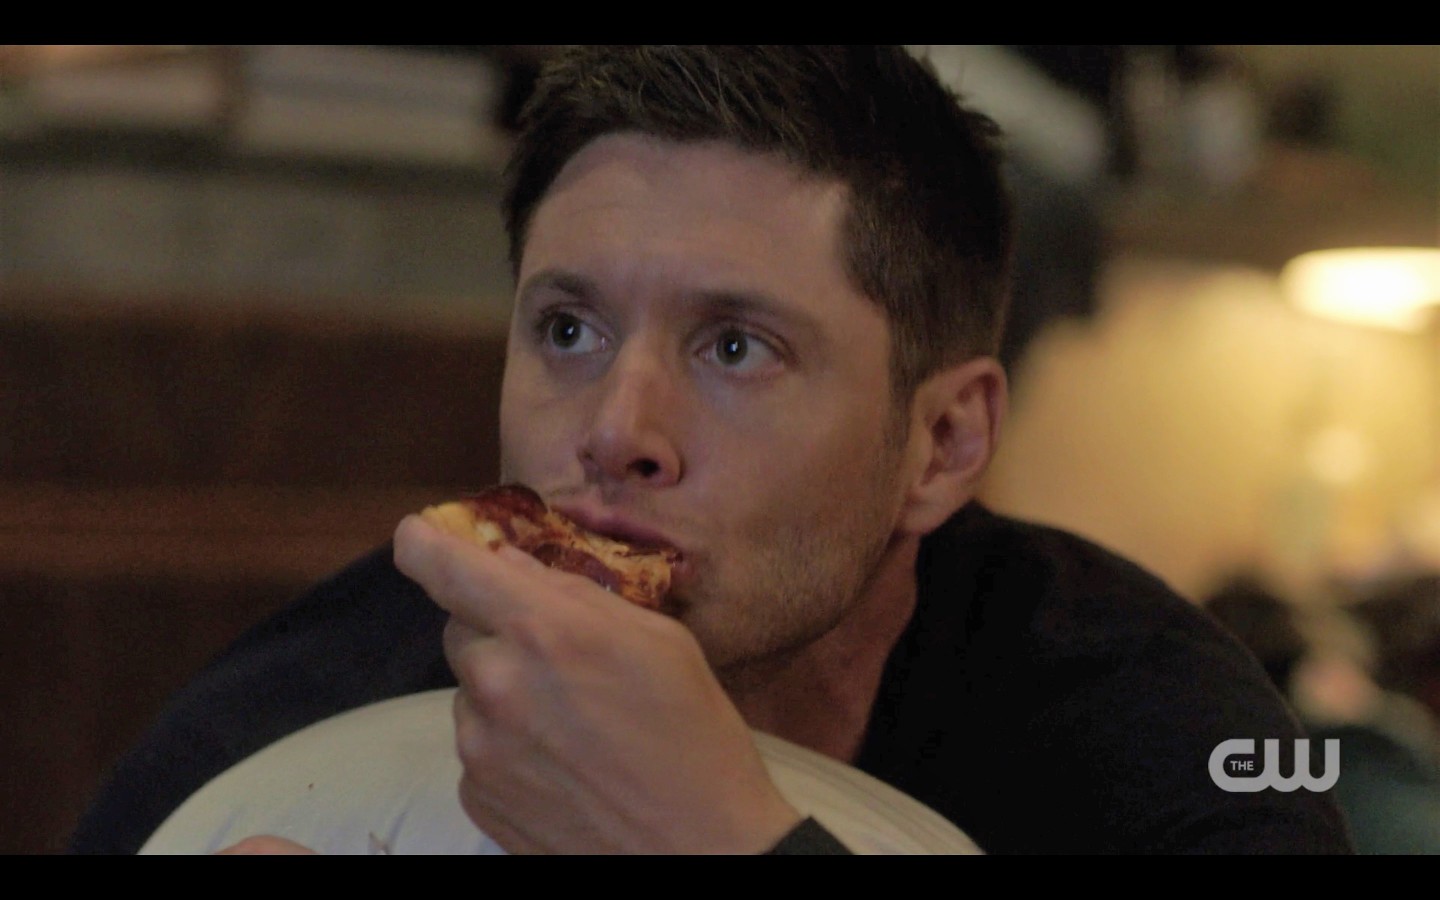 dean winchester shoving pizza in mouth spn 1404